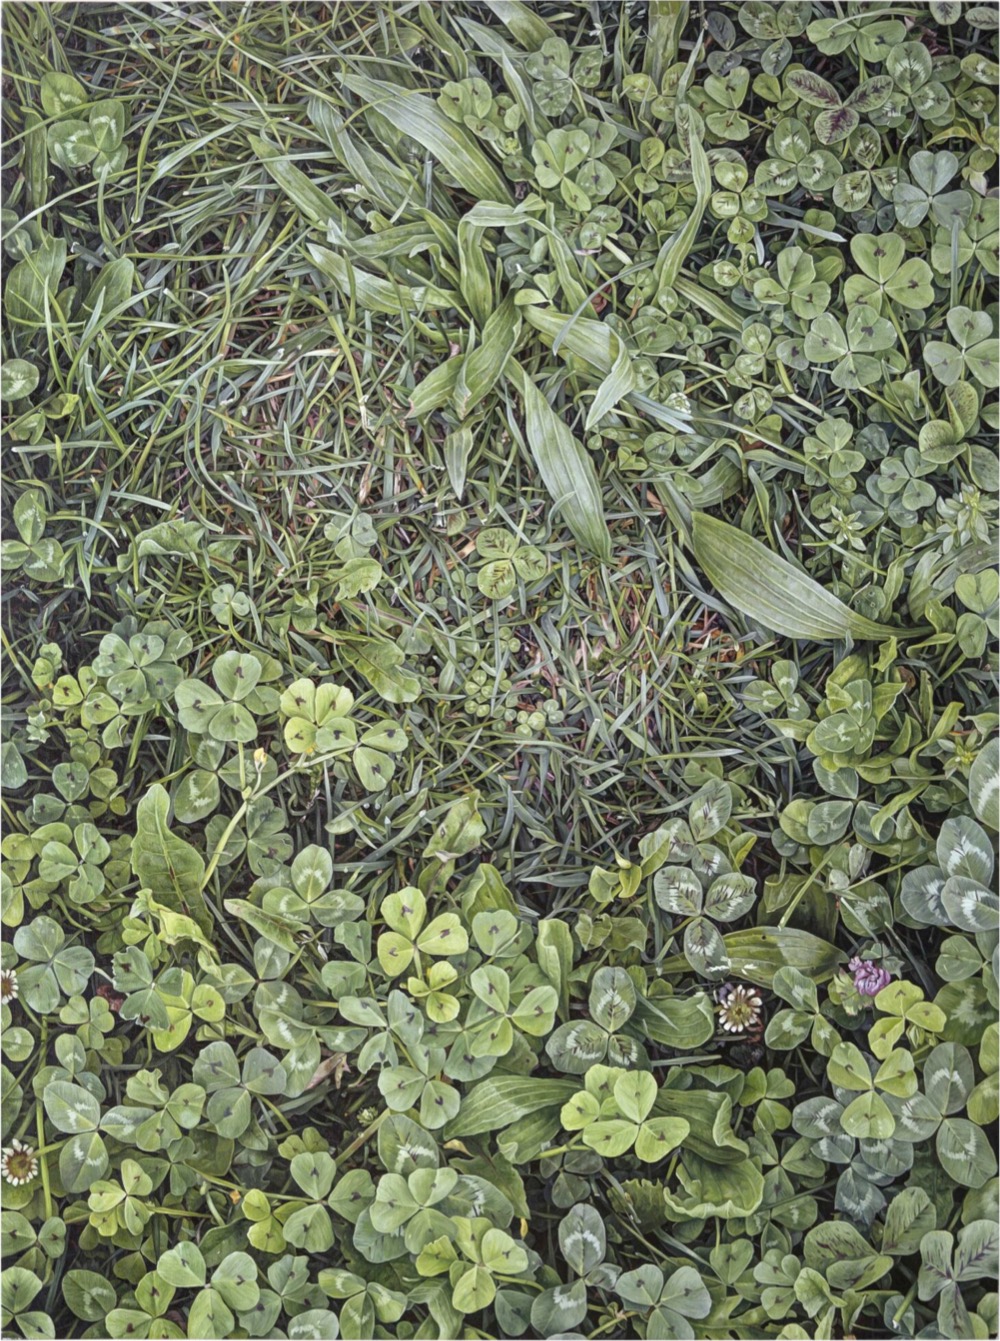 hyperrealistic painting of grasses and leaves